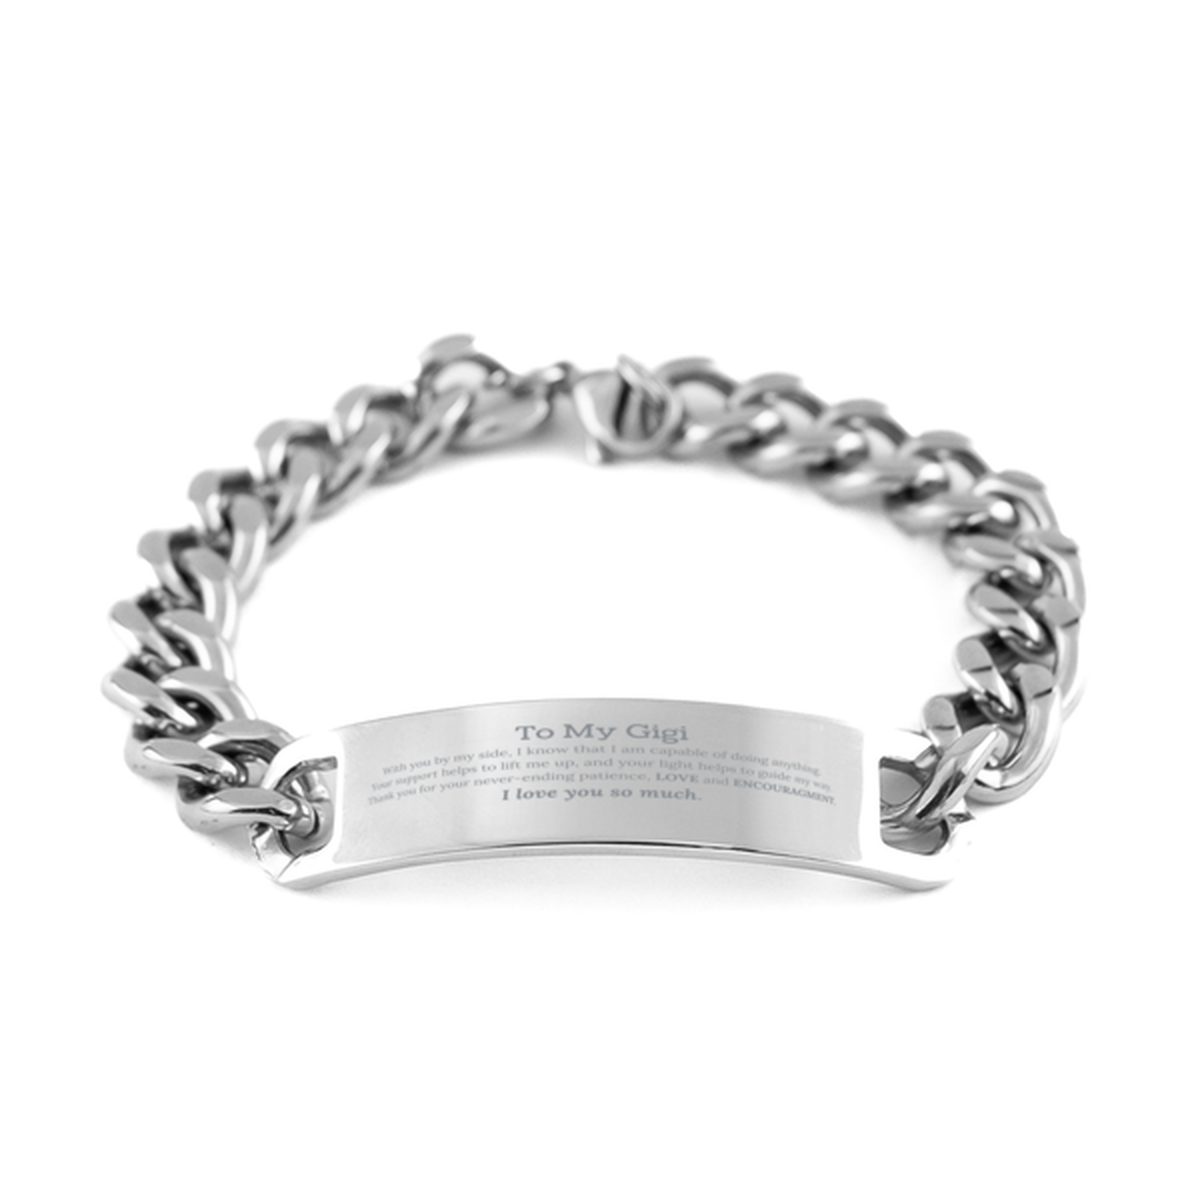 Appreciation Gigi Cuban Chain Stainless Steel Bracelet Gifts, To My Gigi Birthday Christmas Wedding Keepsake Gifts for Gigi With you by my side, I know that I am capable of doing anything. I love you so much